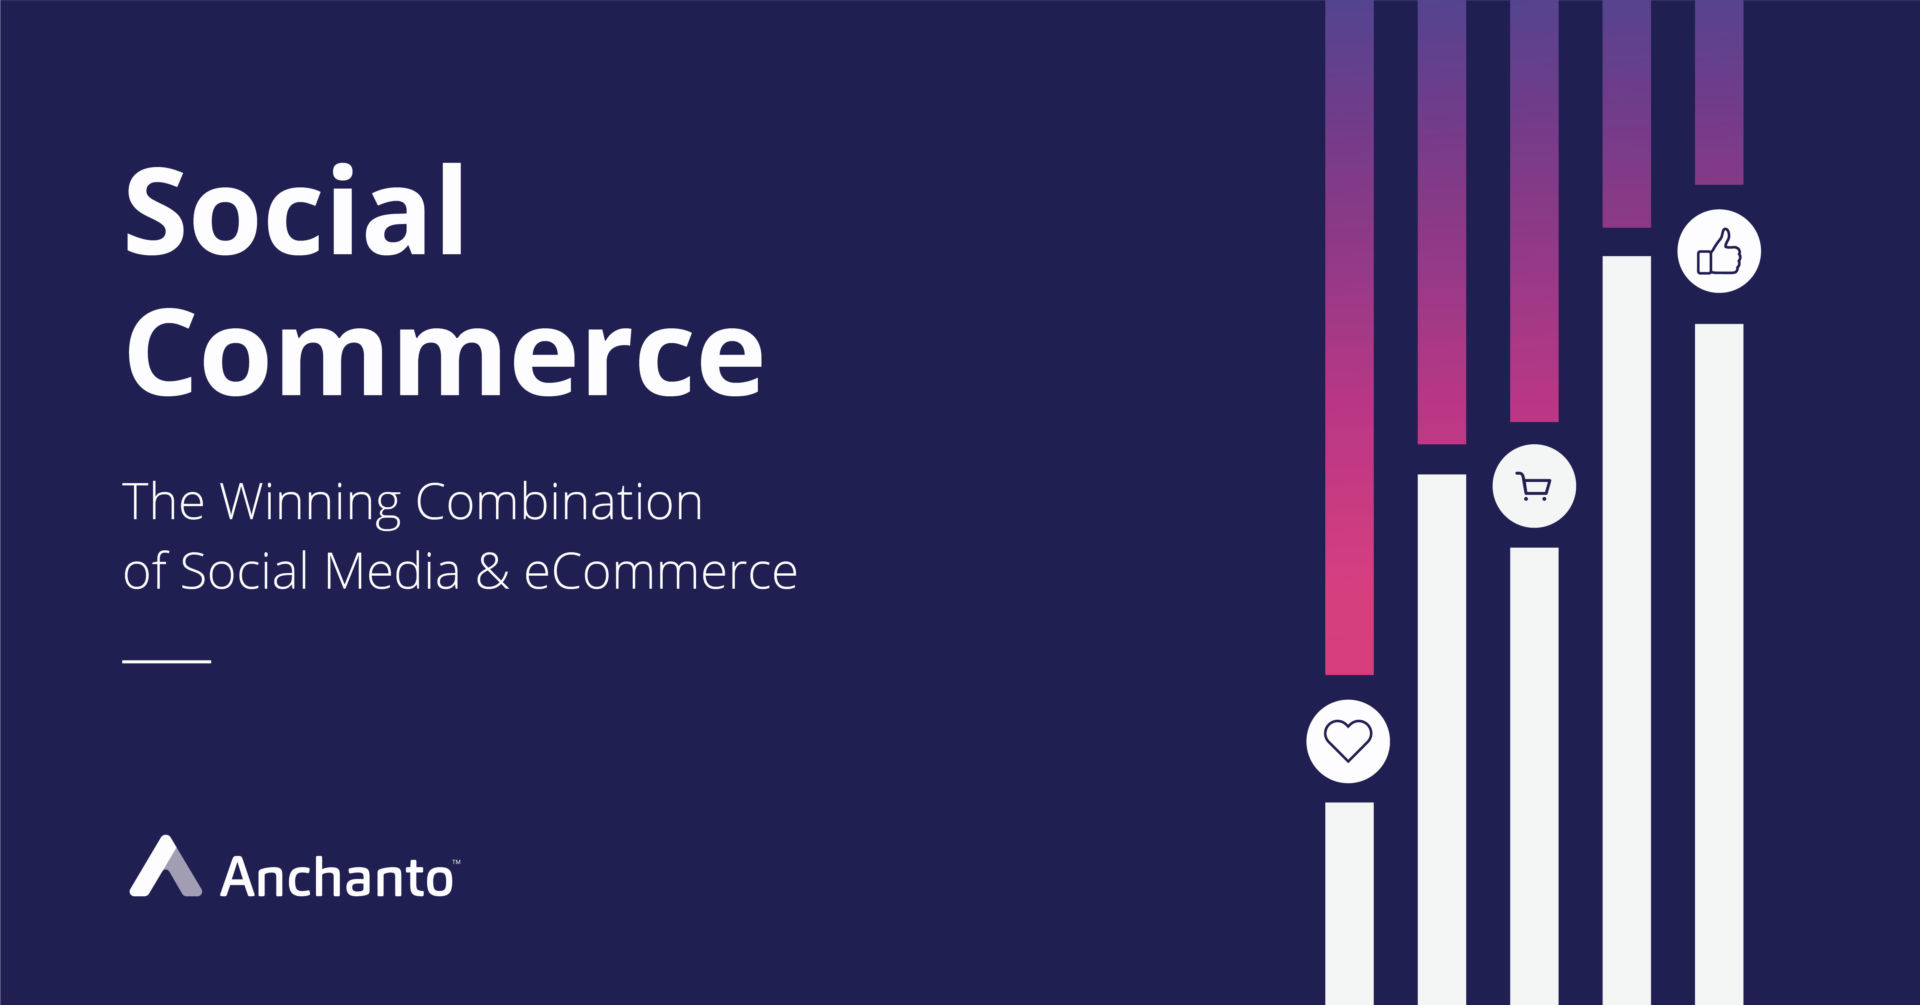 Social Commerce: The Winning Combination of Social Media and eCommerce